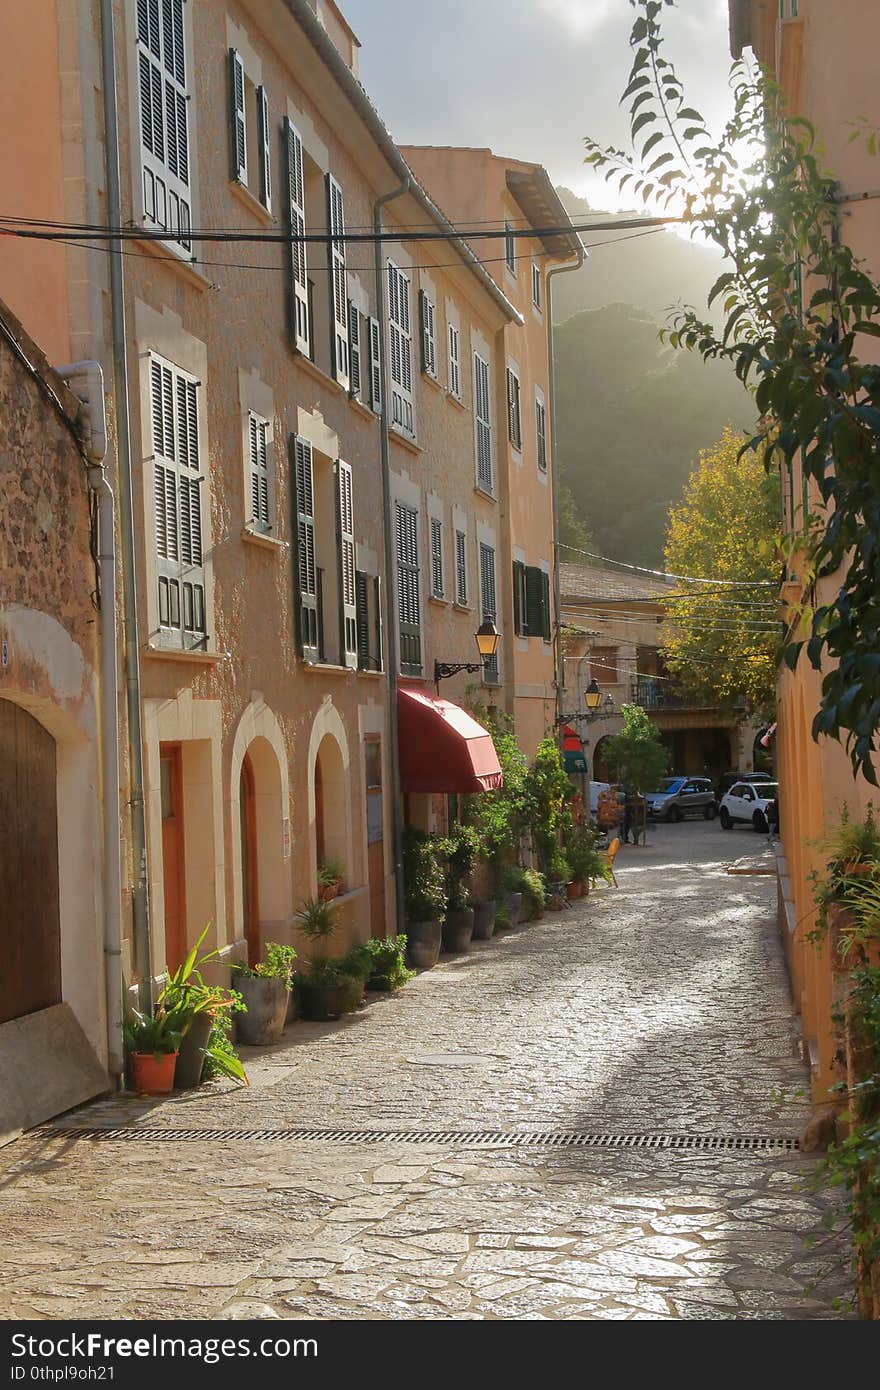 The photo shows the street of the old village of Valldemossa in the mountains of the island of Palma de Mallorca. Photo taken before sunset. The photo shows the street of the old village of Valldemossa in the mountains of the island of Palma de Mallorca. Photo taken before sunset